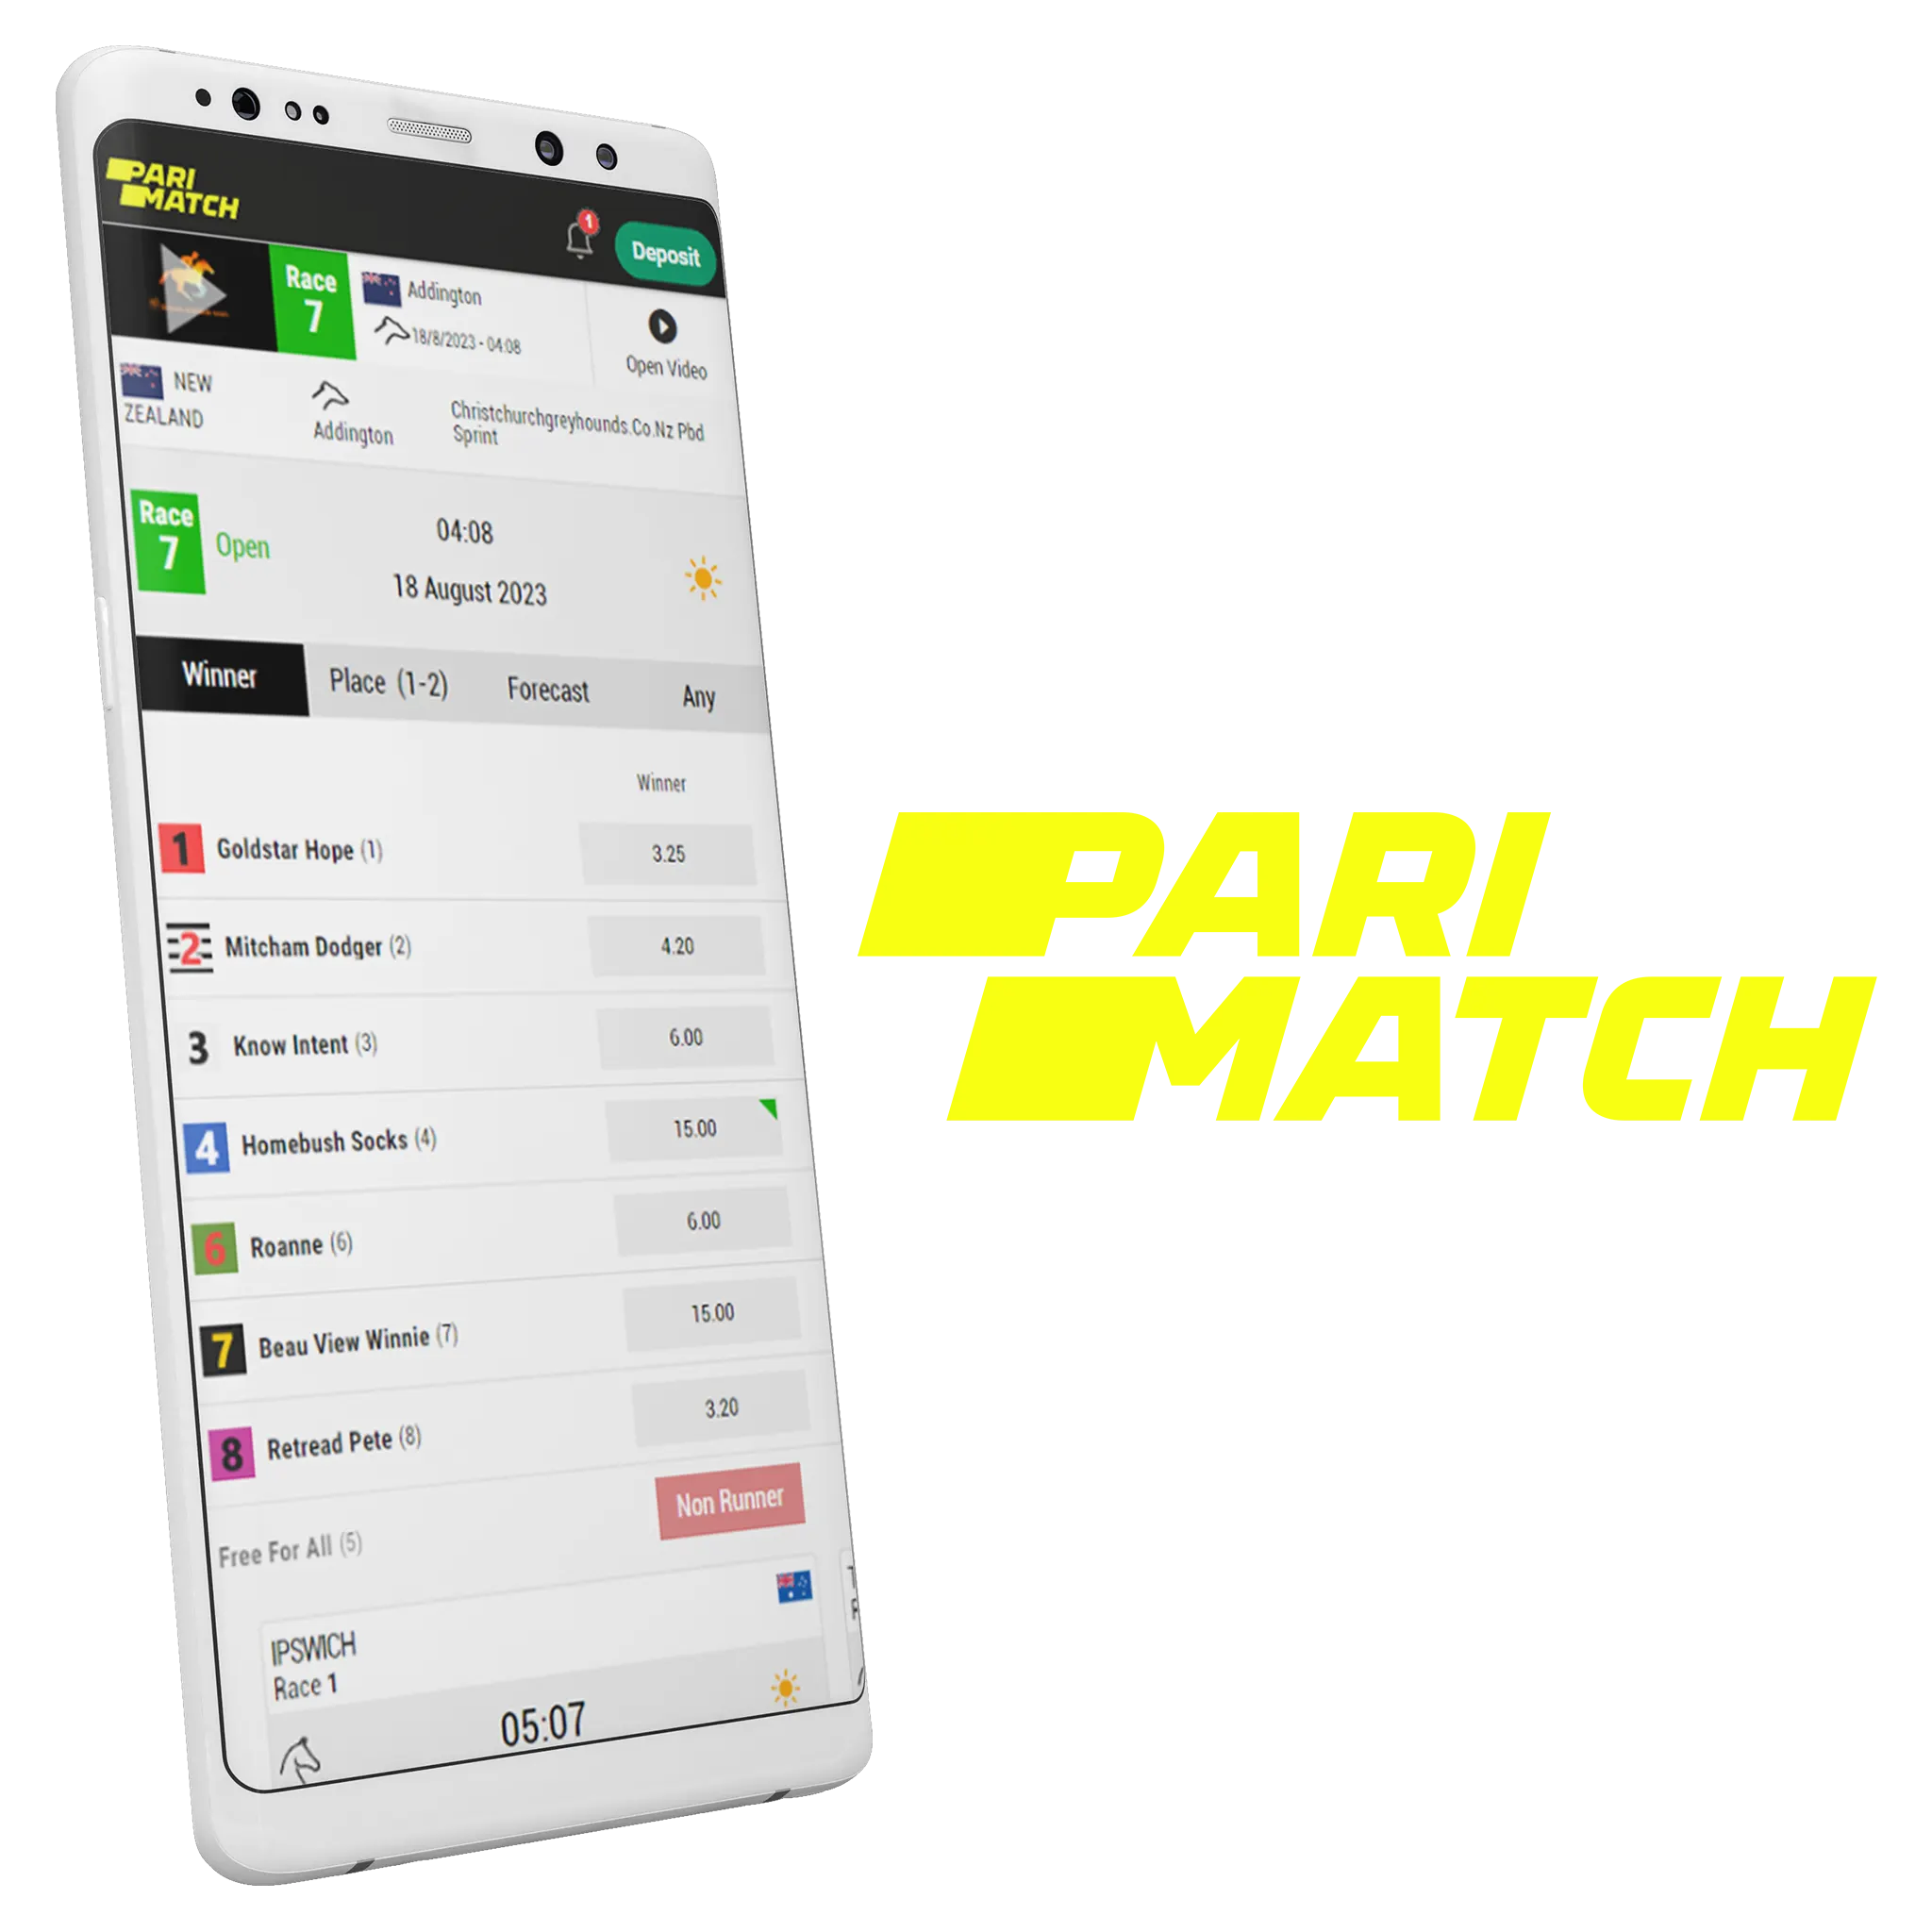 Place bets on horse racing in the Parimatch app.